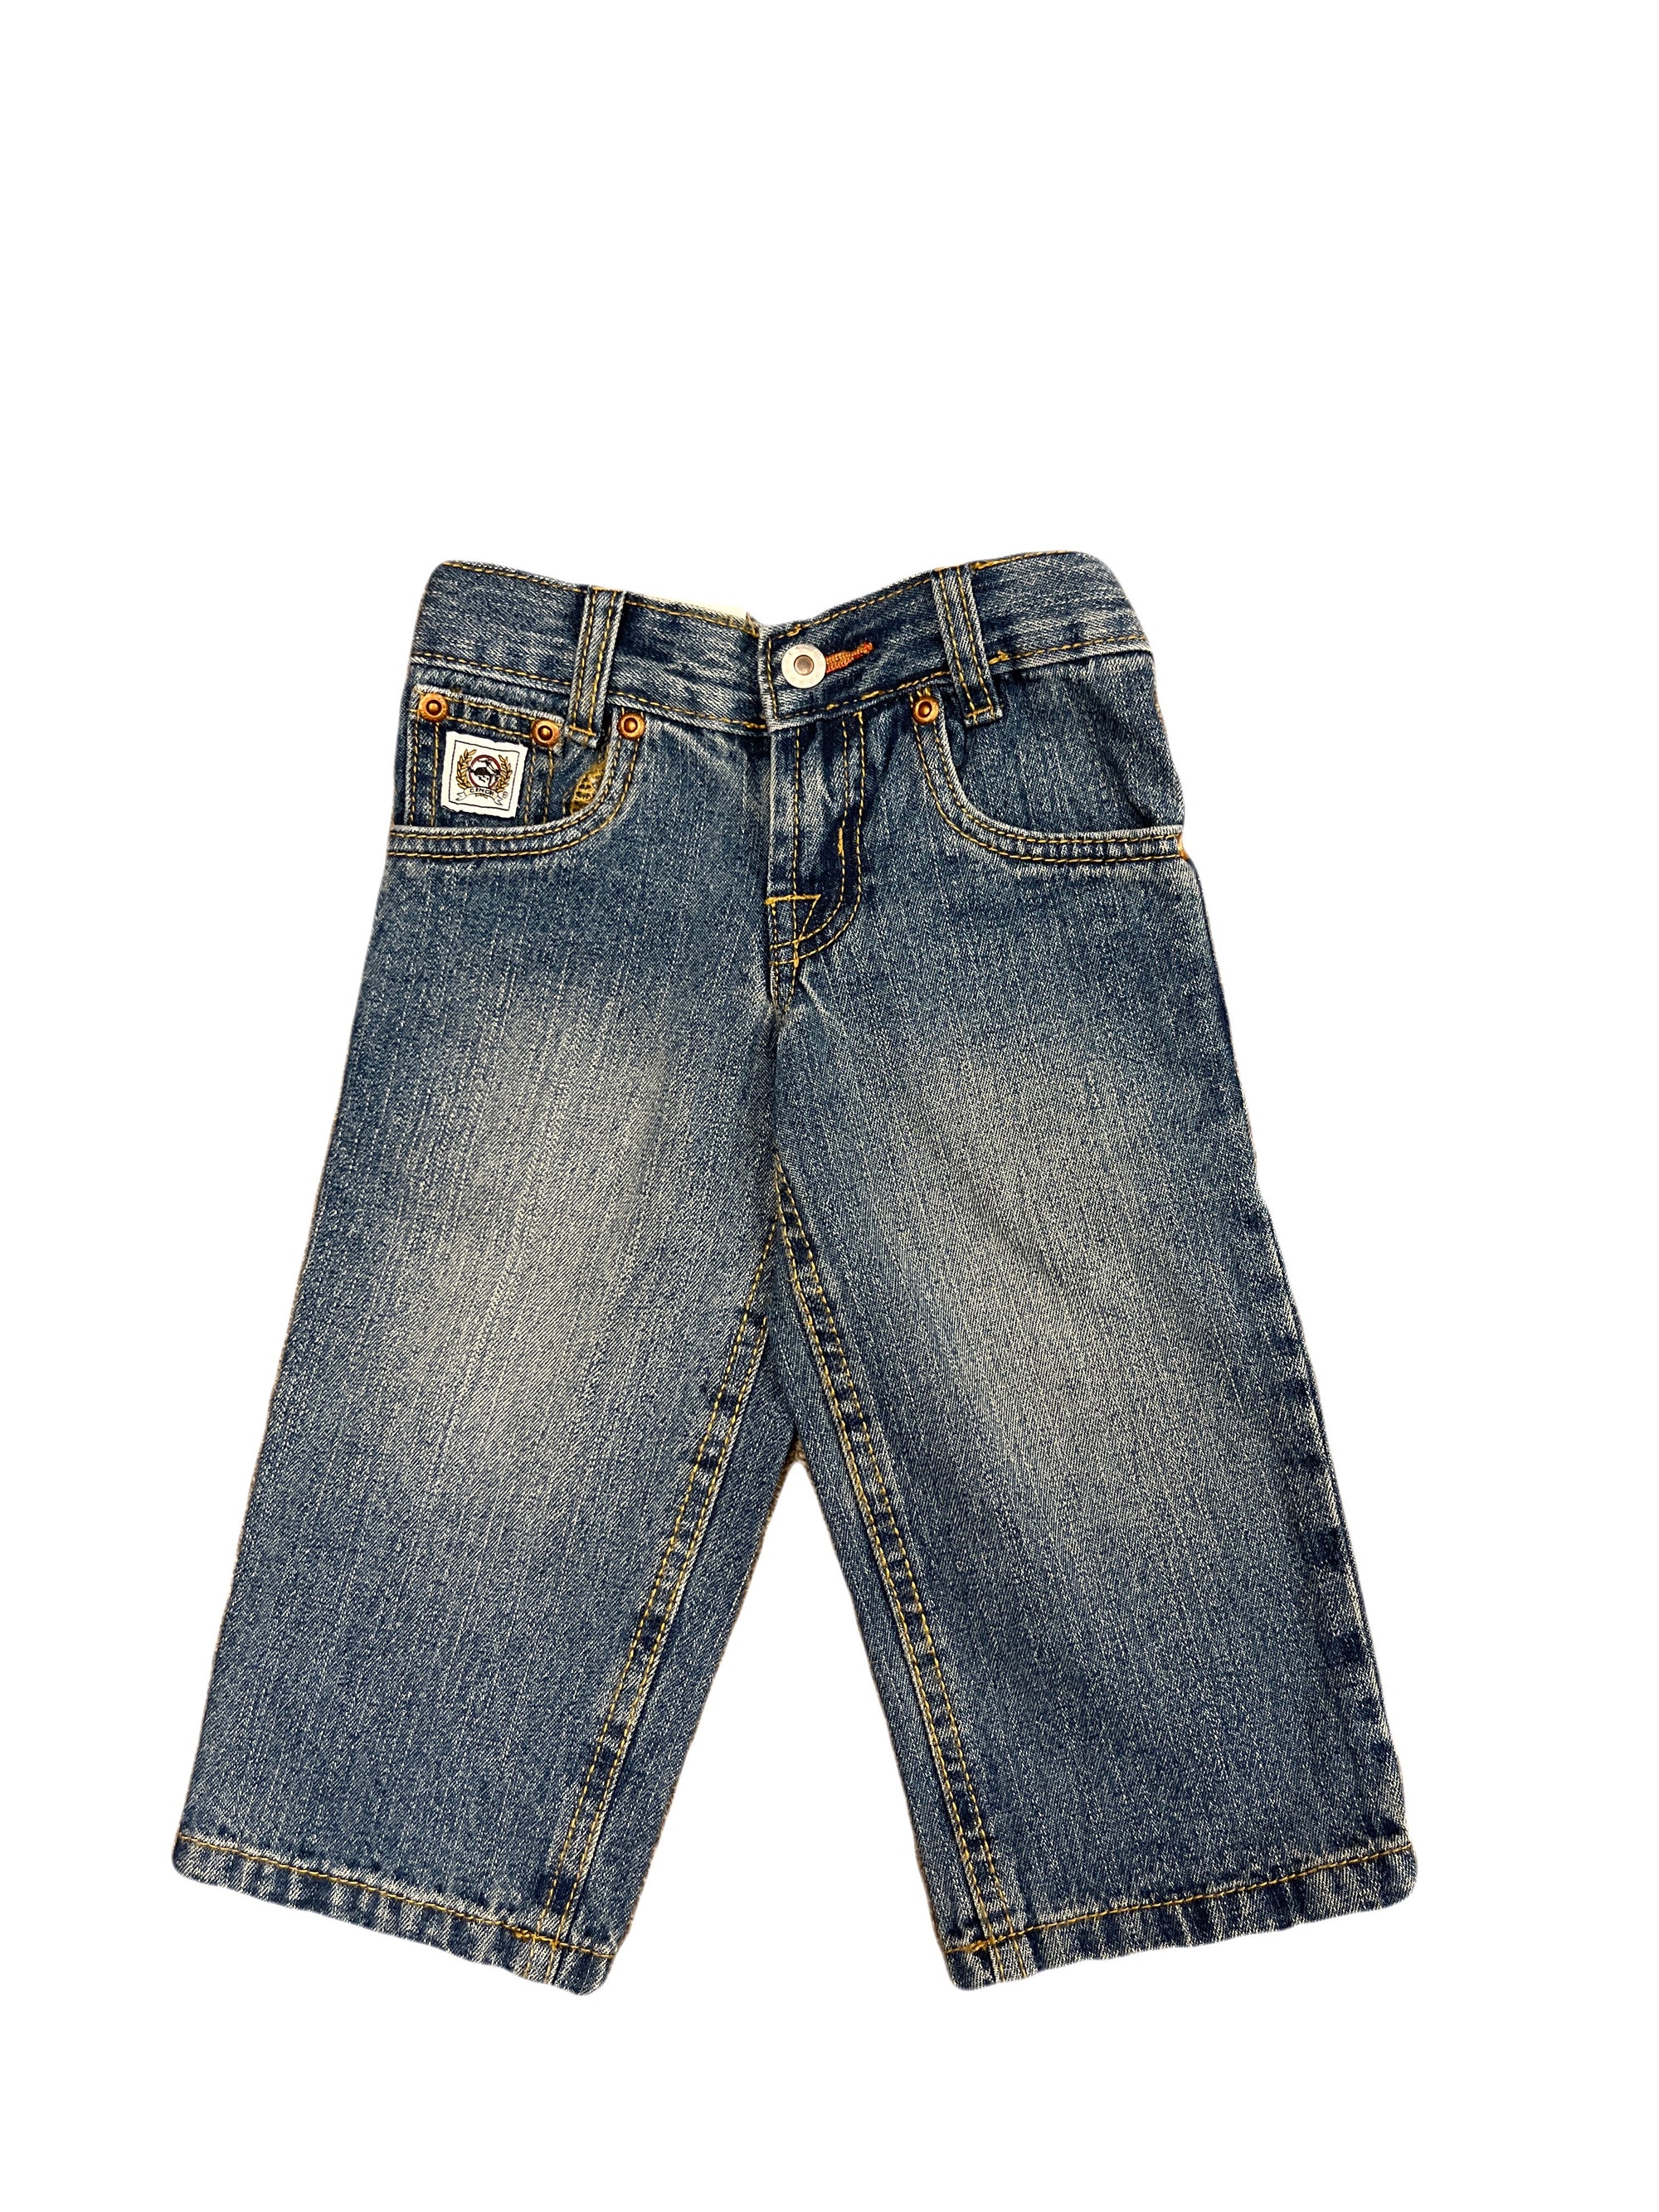 Cinch Toddler Boy's White Label Jean STYLE MB12820001